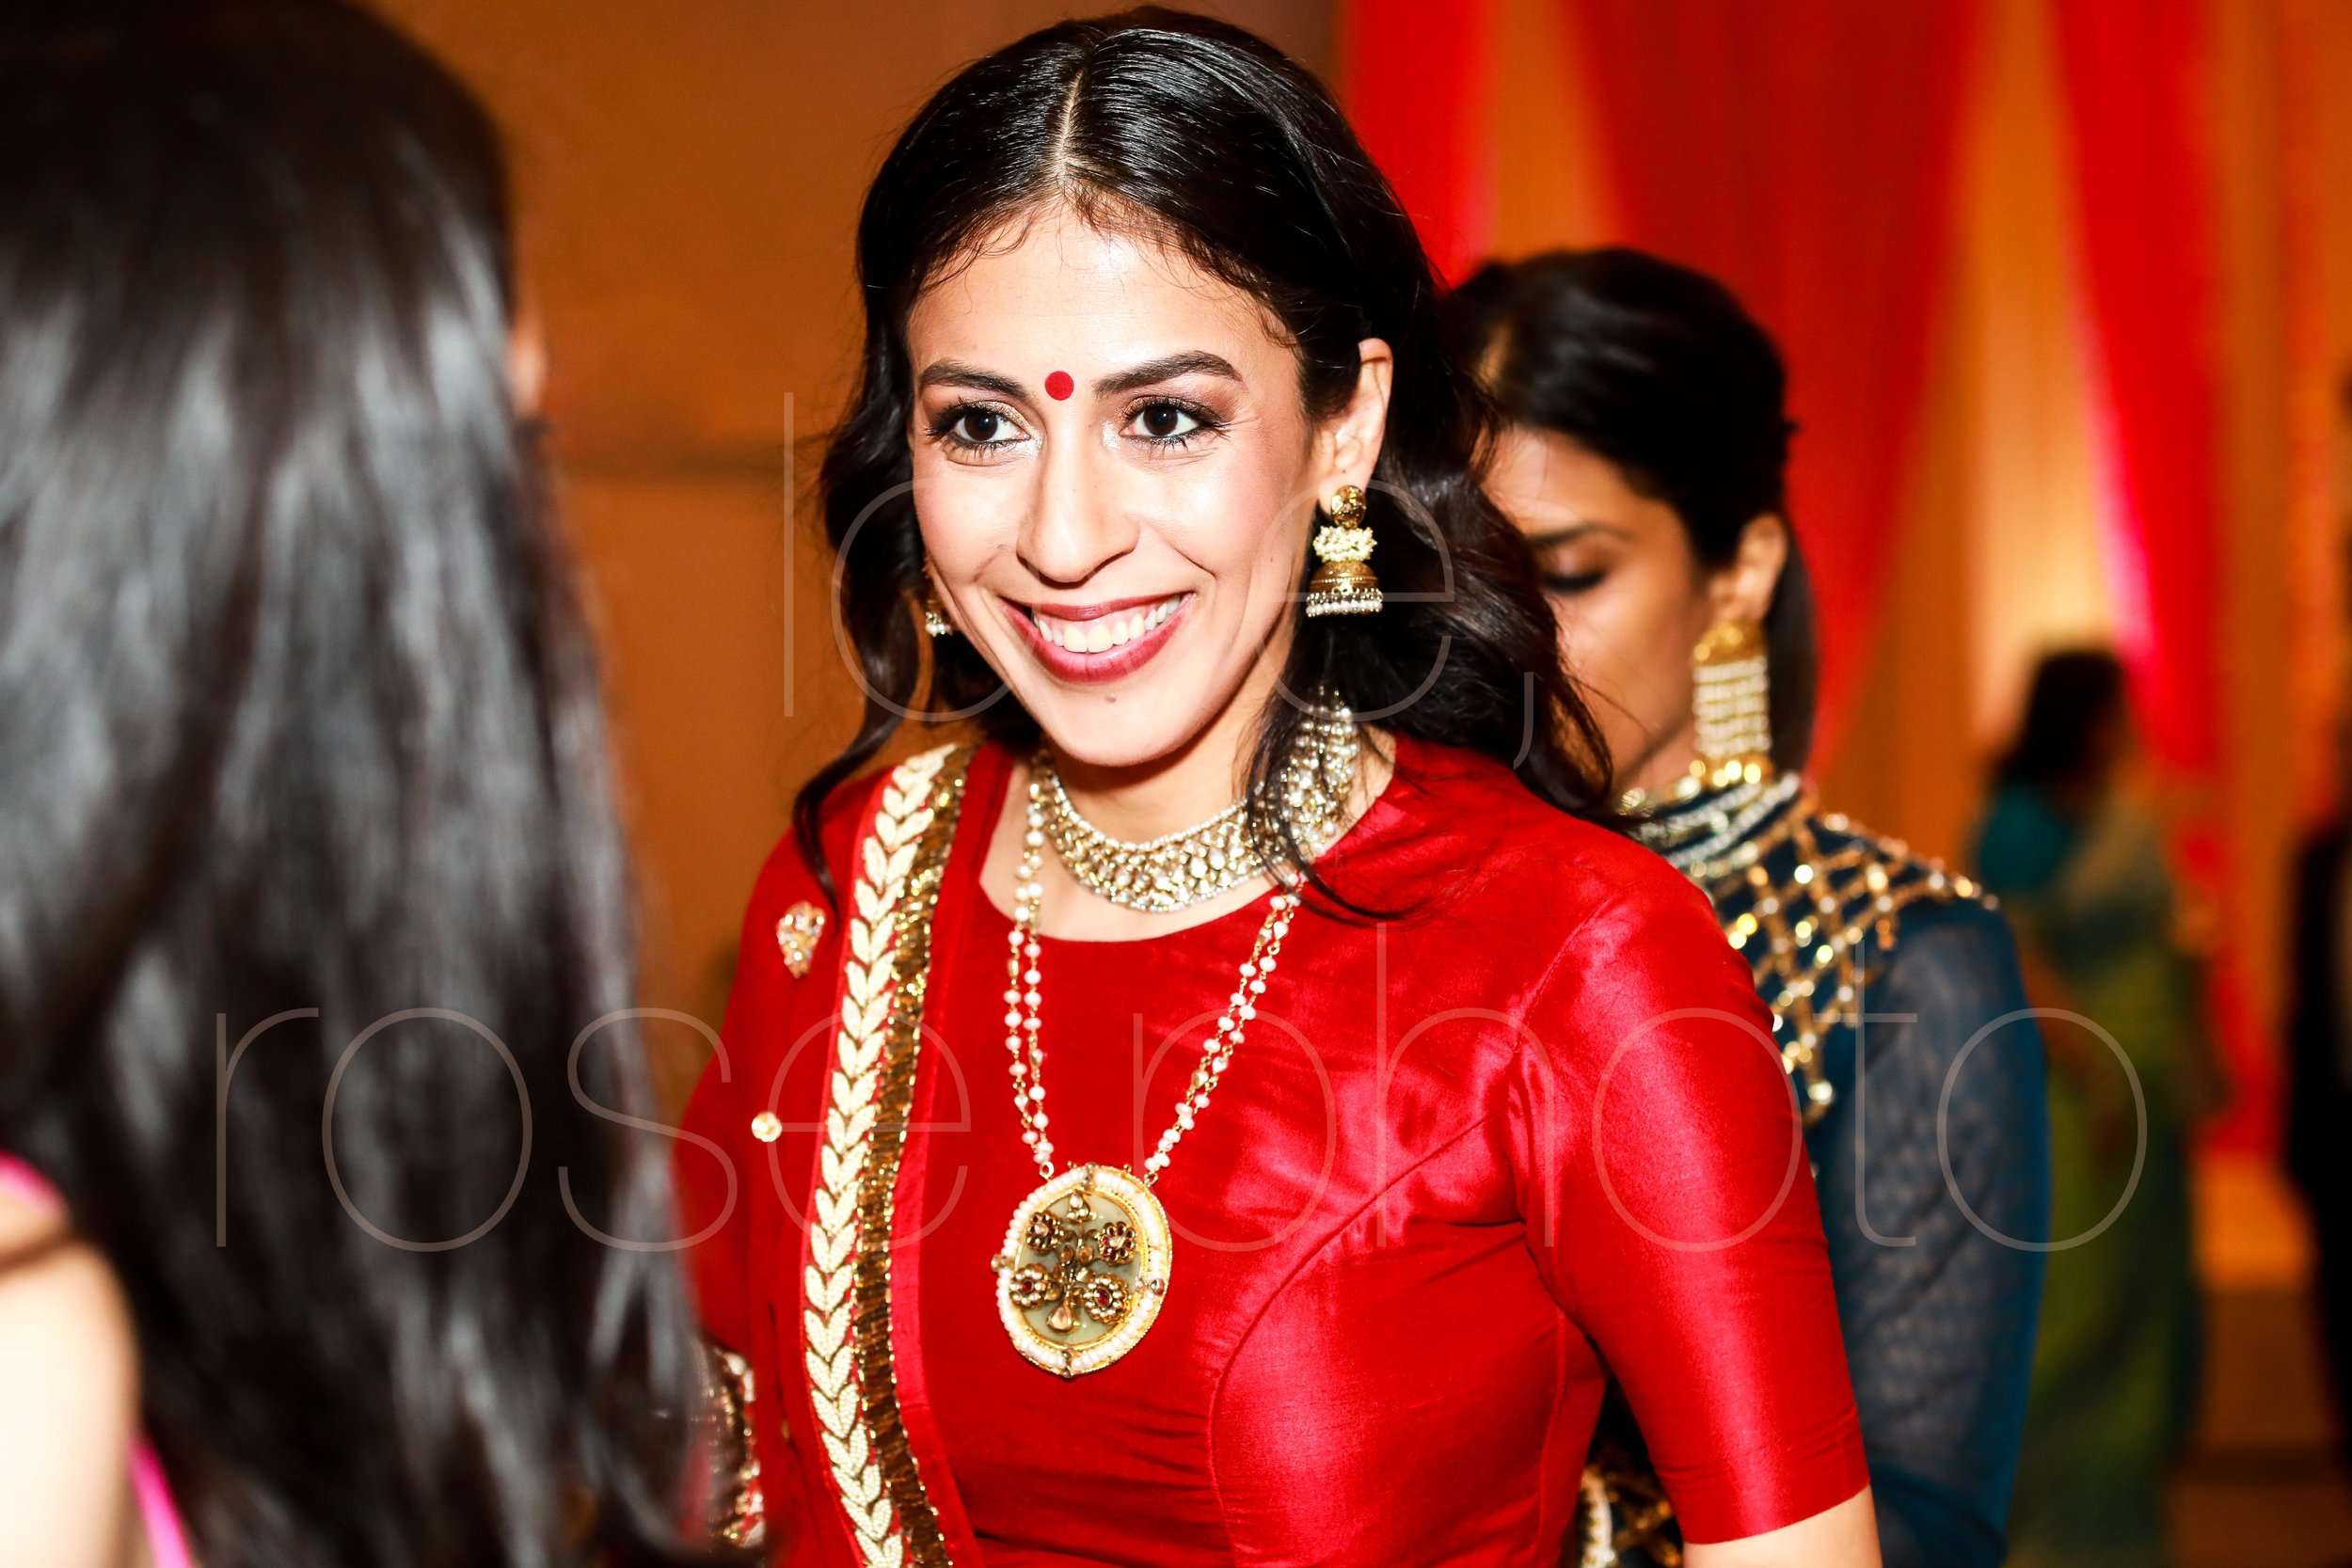 best chicago indian wedding photographer rose photo video collective-24.jpg